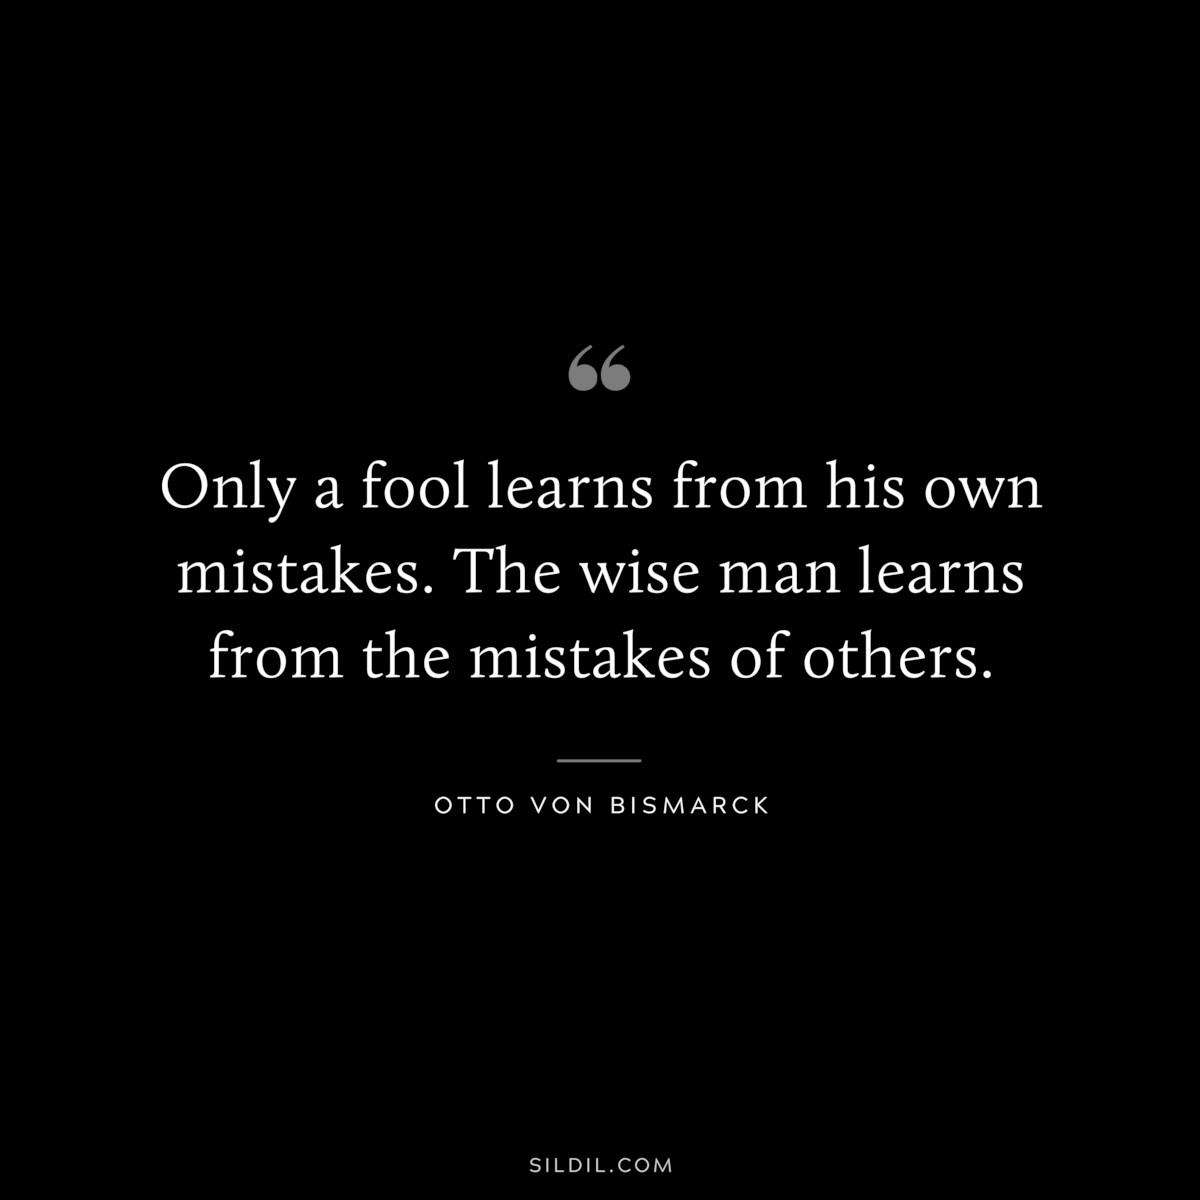 Only a fool learns from his own mistakes. The wise man learns from the mistakes of others. ― Otto von Bismarck